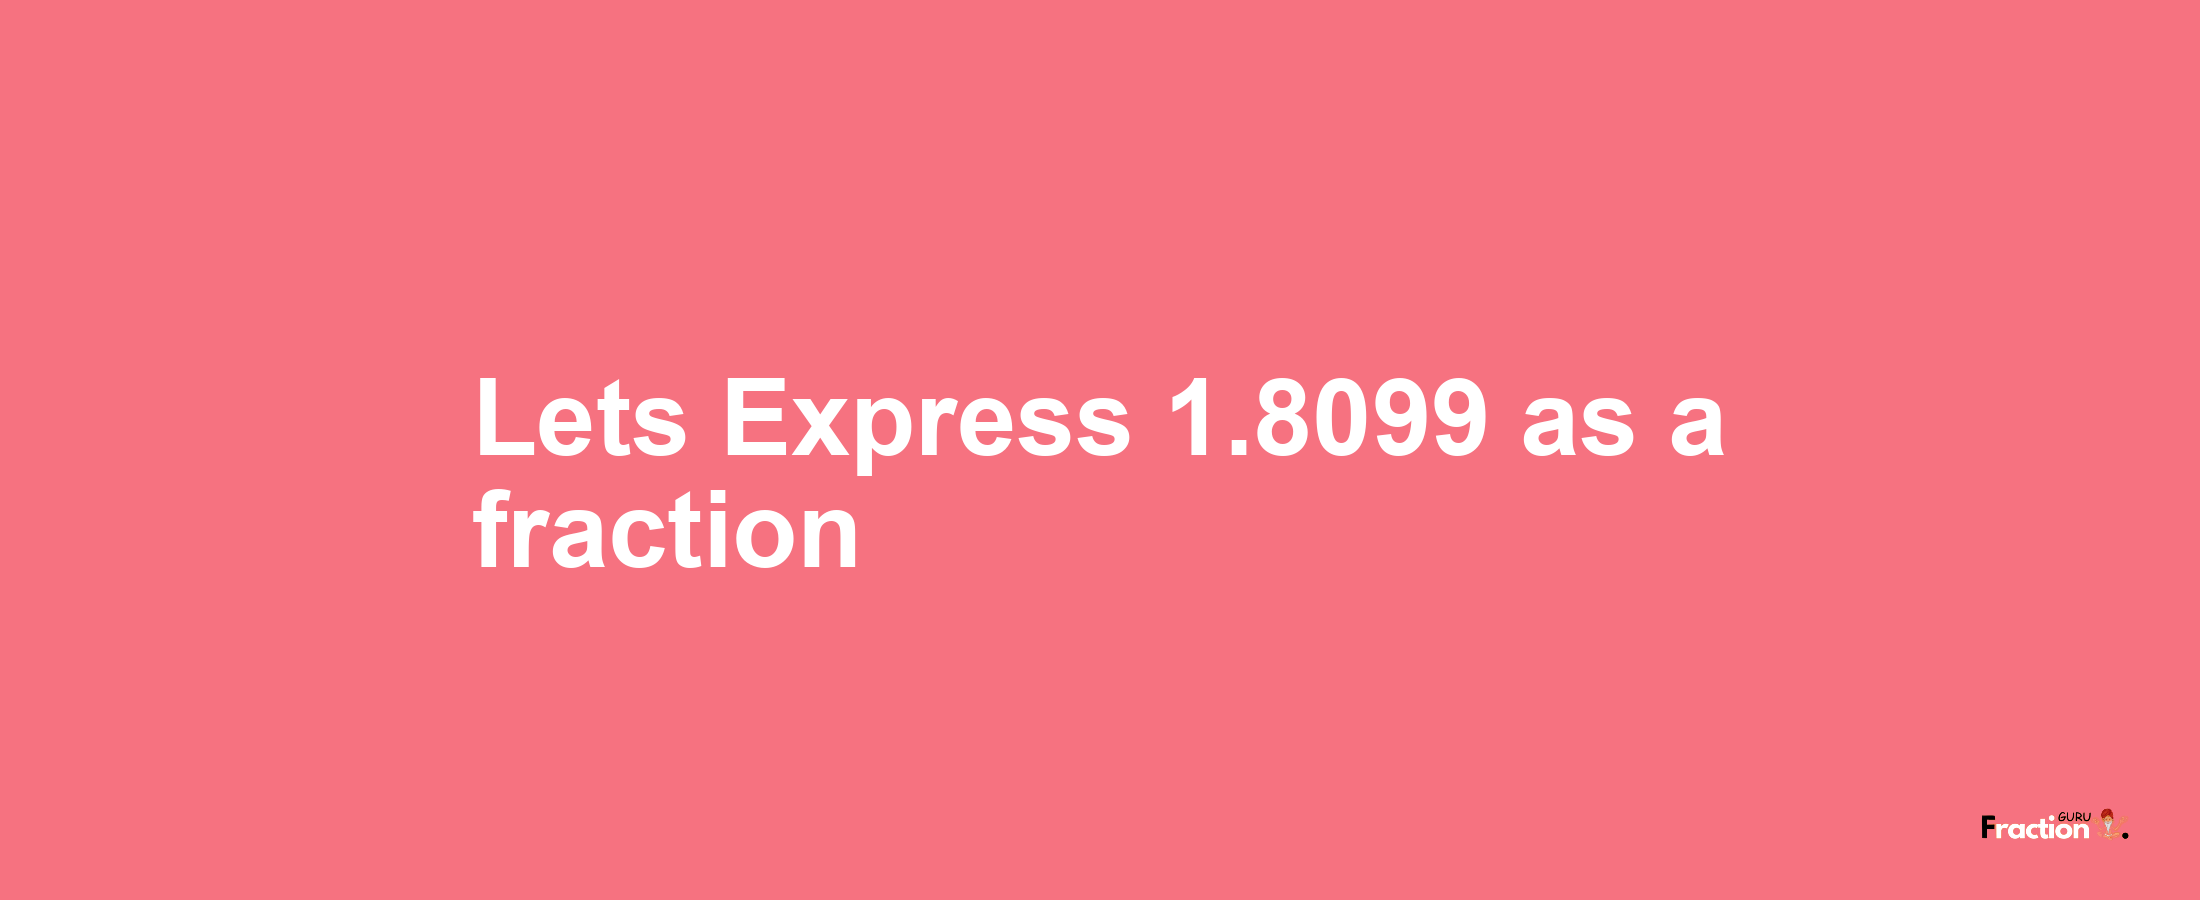 Lets Express 1.8099 as afraction